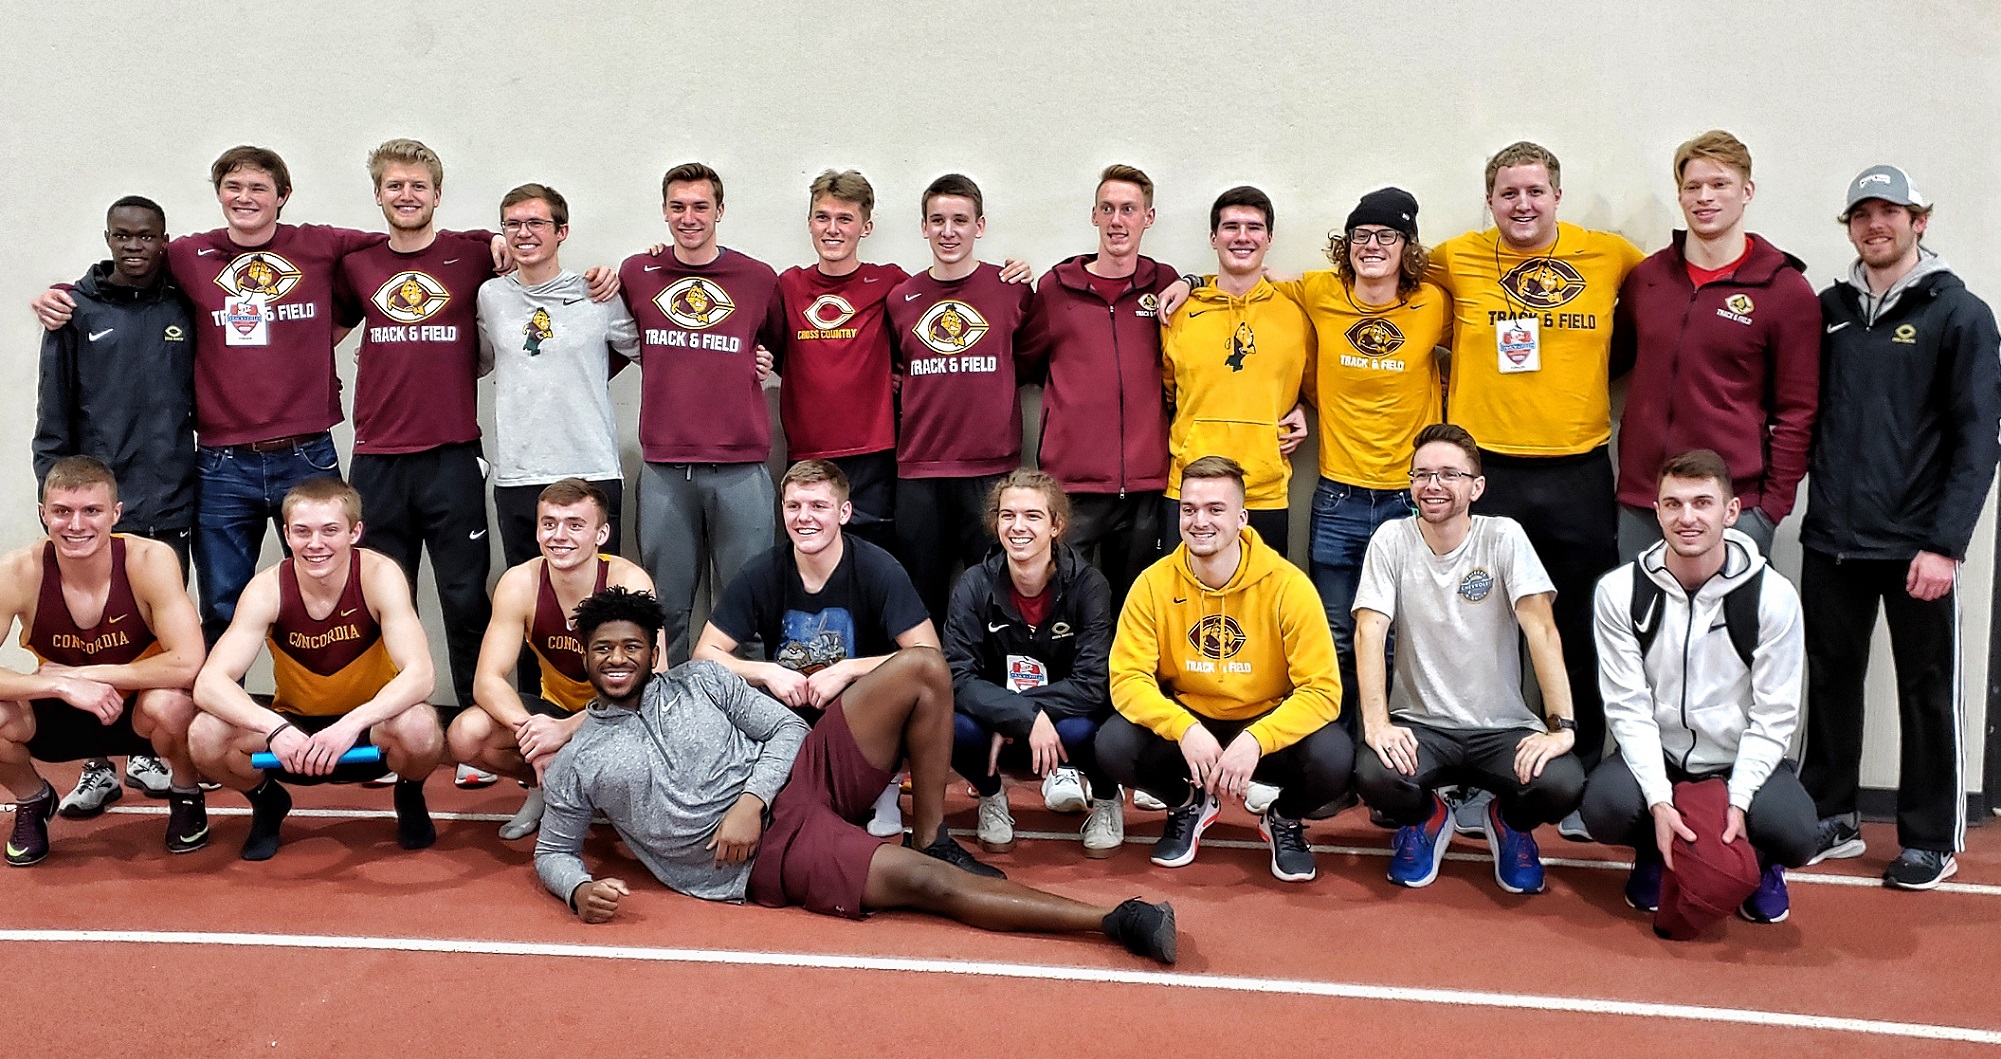 The Cobber men's track and field team posted its highest finish at the MIAC Indoor Meet since the 2000 season.